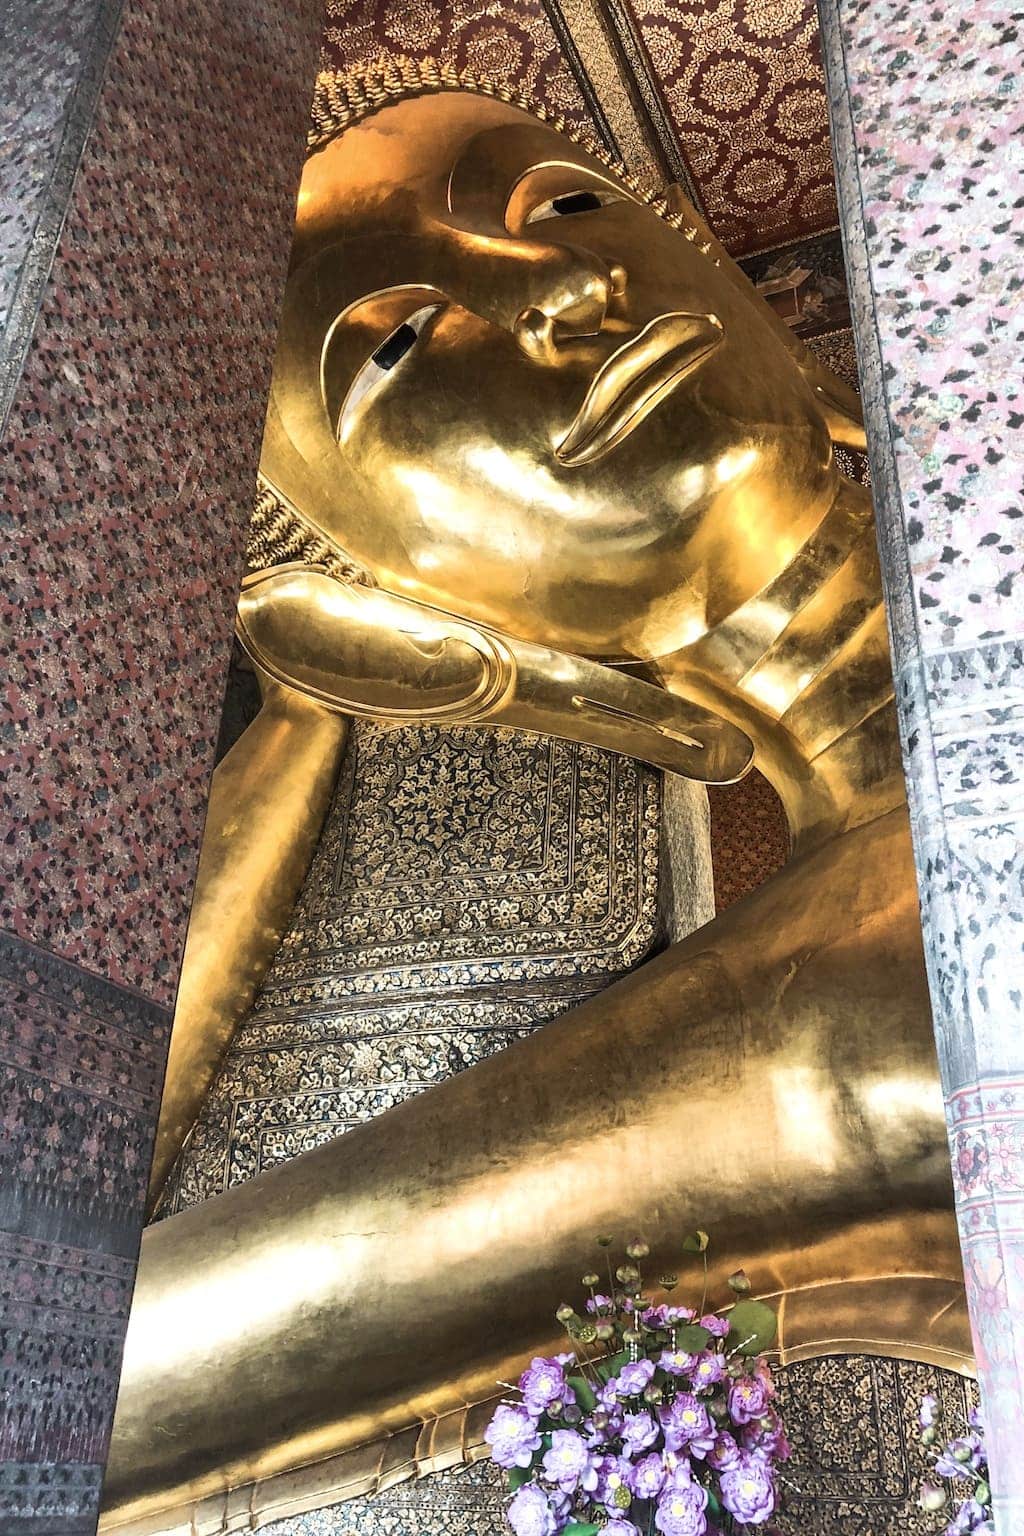 Wat Pho: Temple of the reclining Buddha